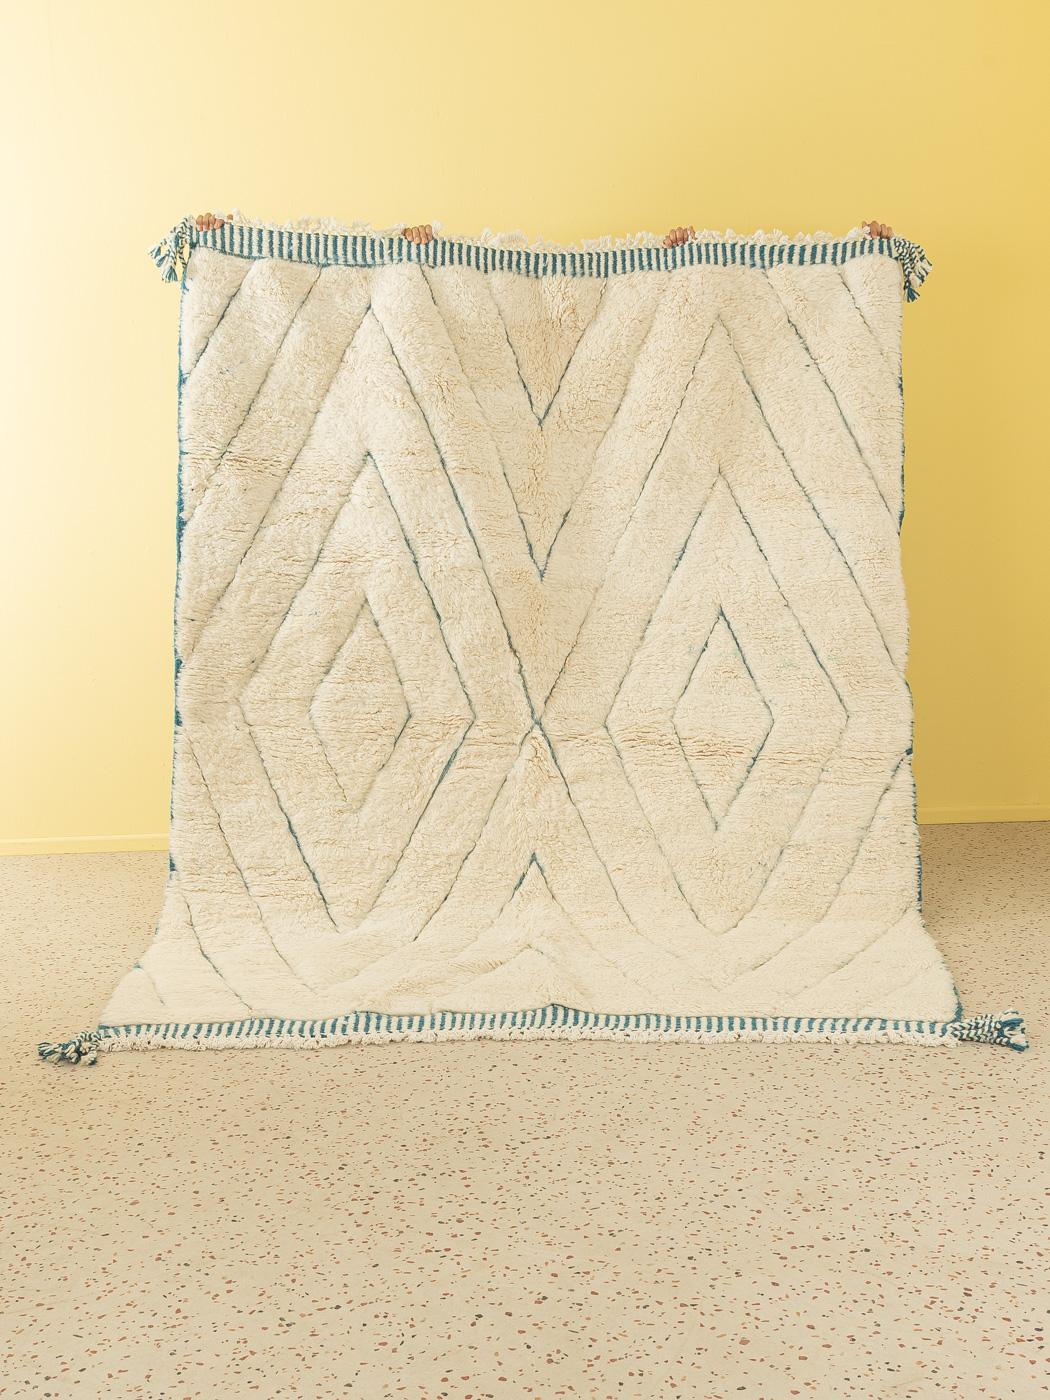 Blue diamond is a contemporary 100% wool rug – thick and soft, comfortable underfoot. Our Berber rugs are handwoven and handknotted by Amazigh women in the Atlas Mountains. These communities have been crafting rugs for thousands of years. One knot